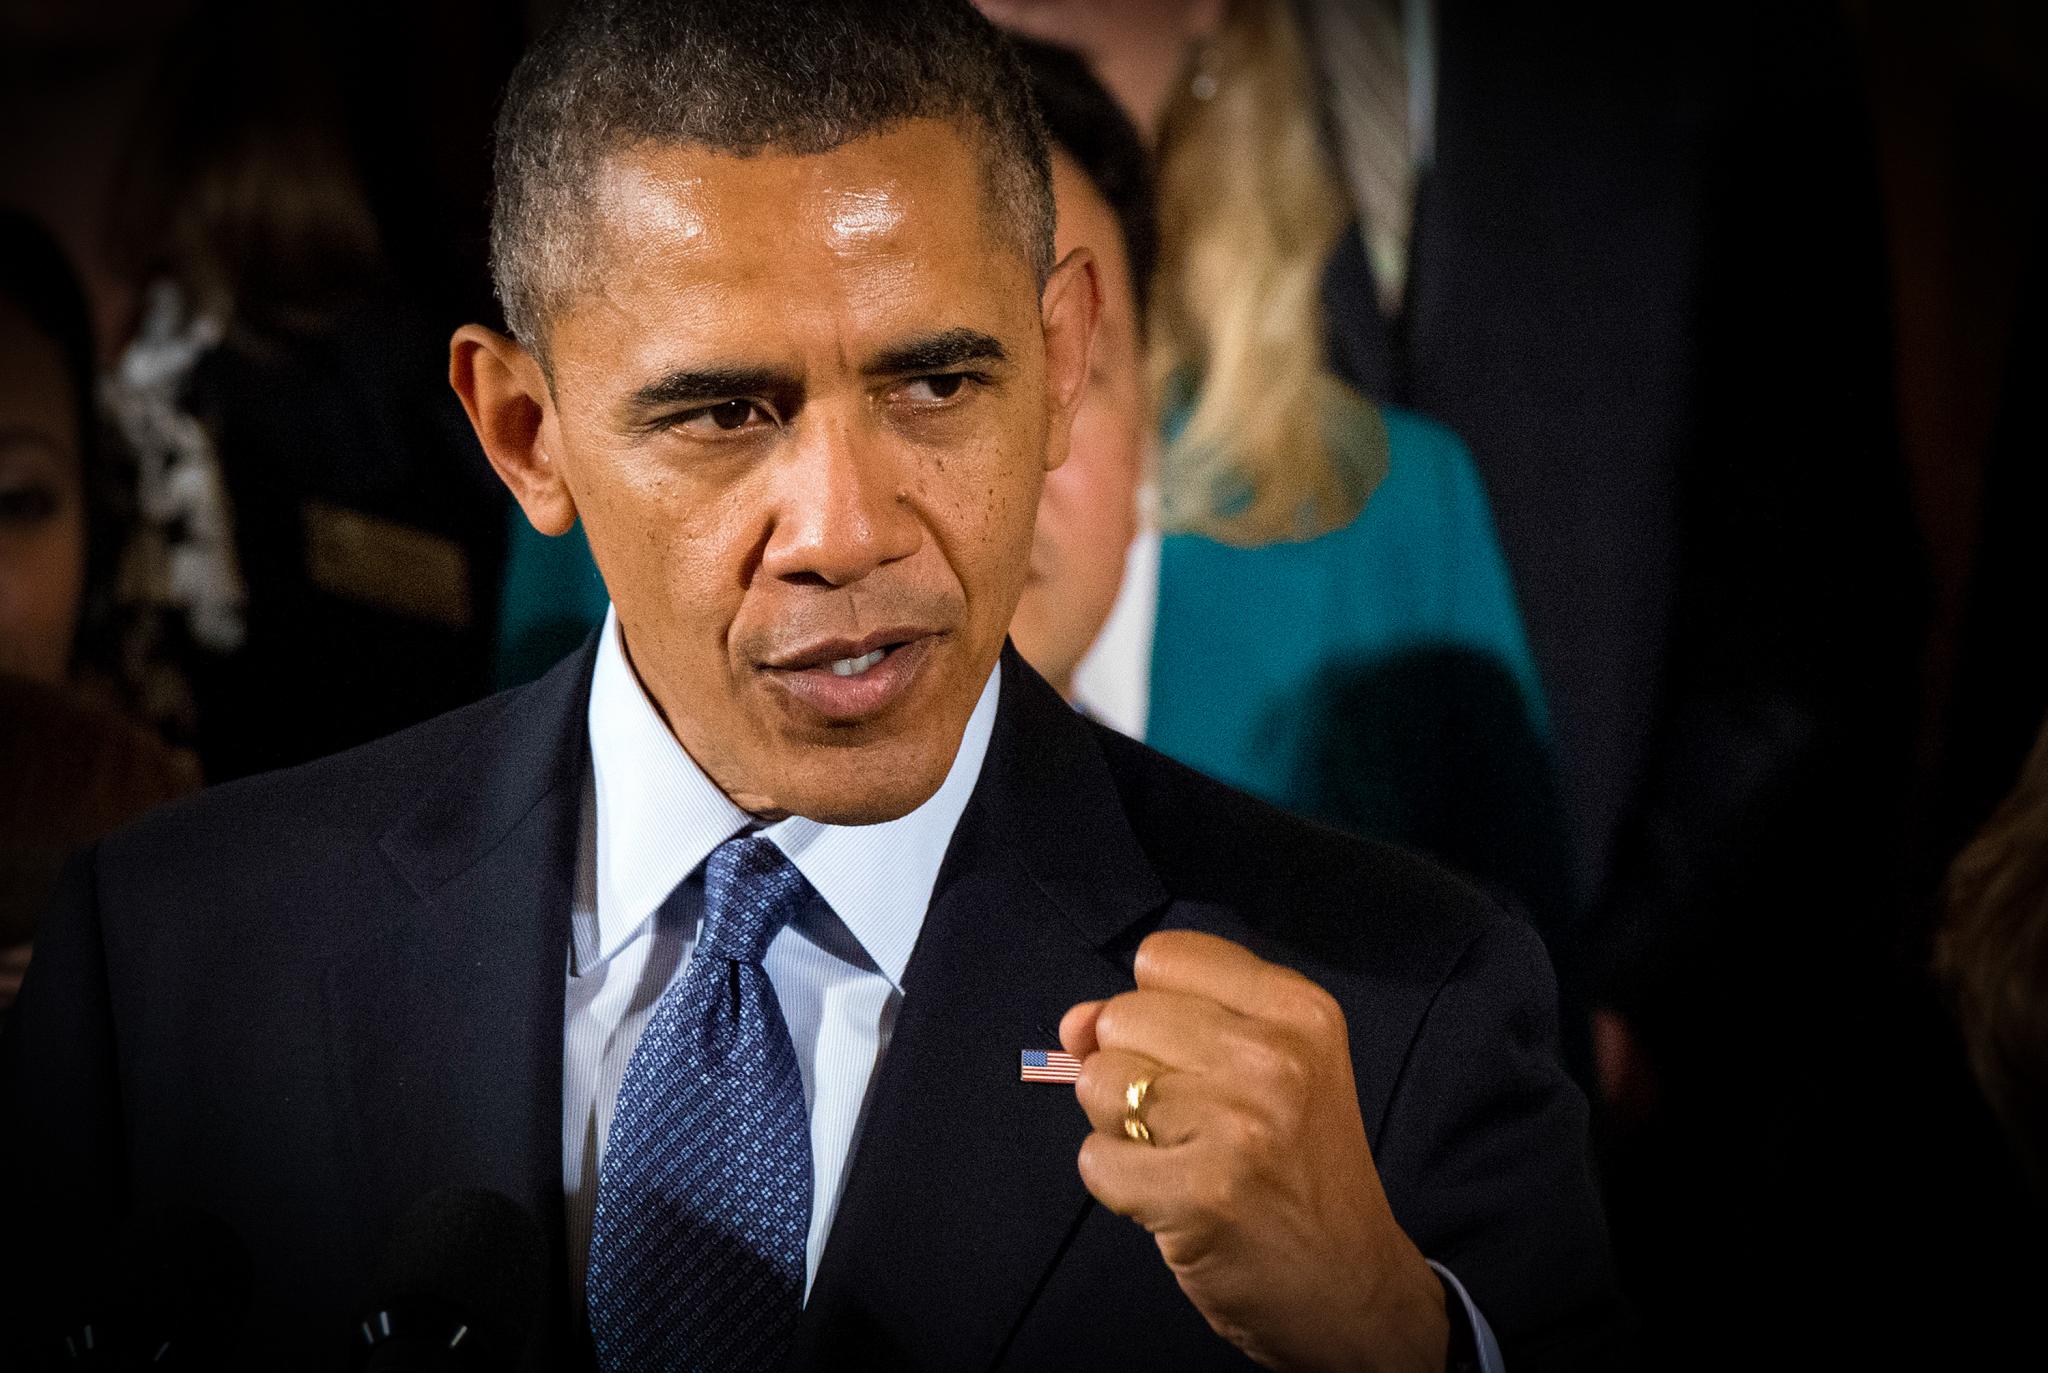 President Obama: Chances of Ebola Epidemic in the U.S. Are 'Extraordinarily Small'
